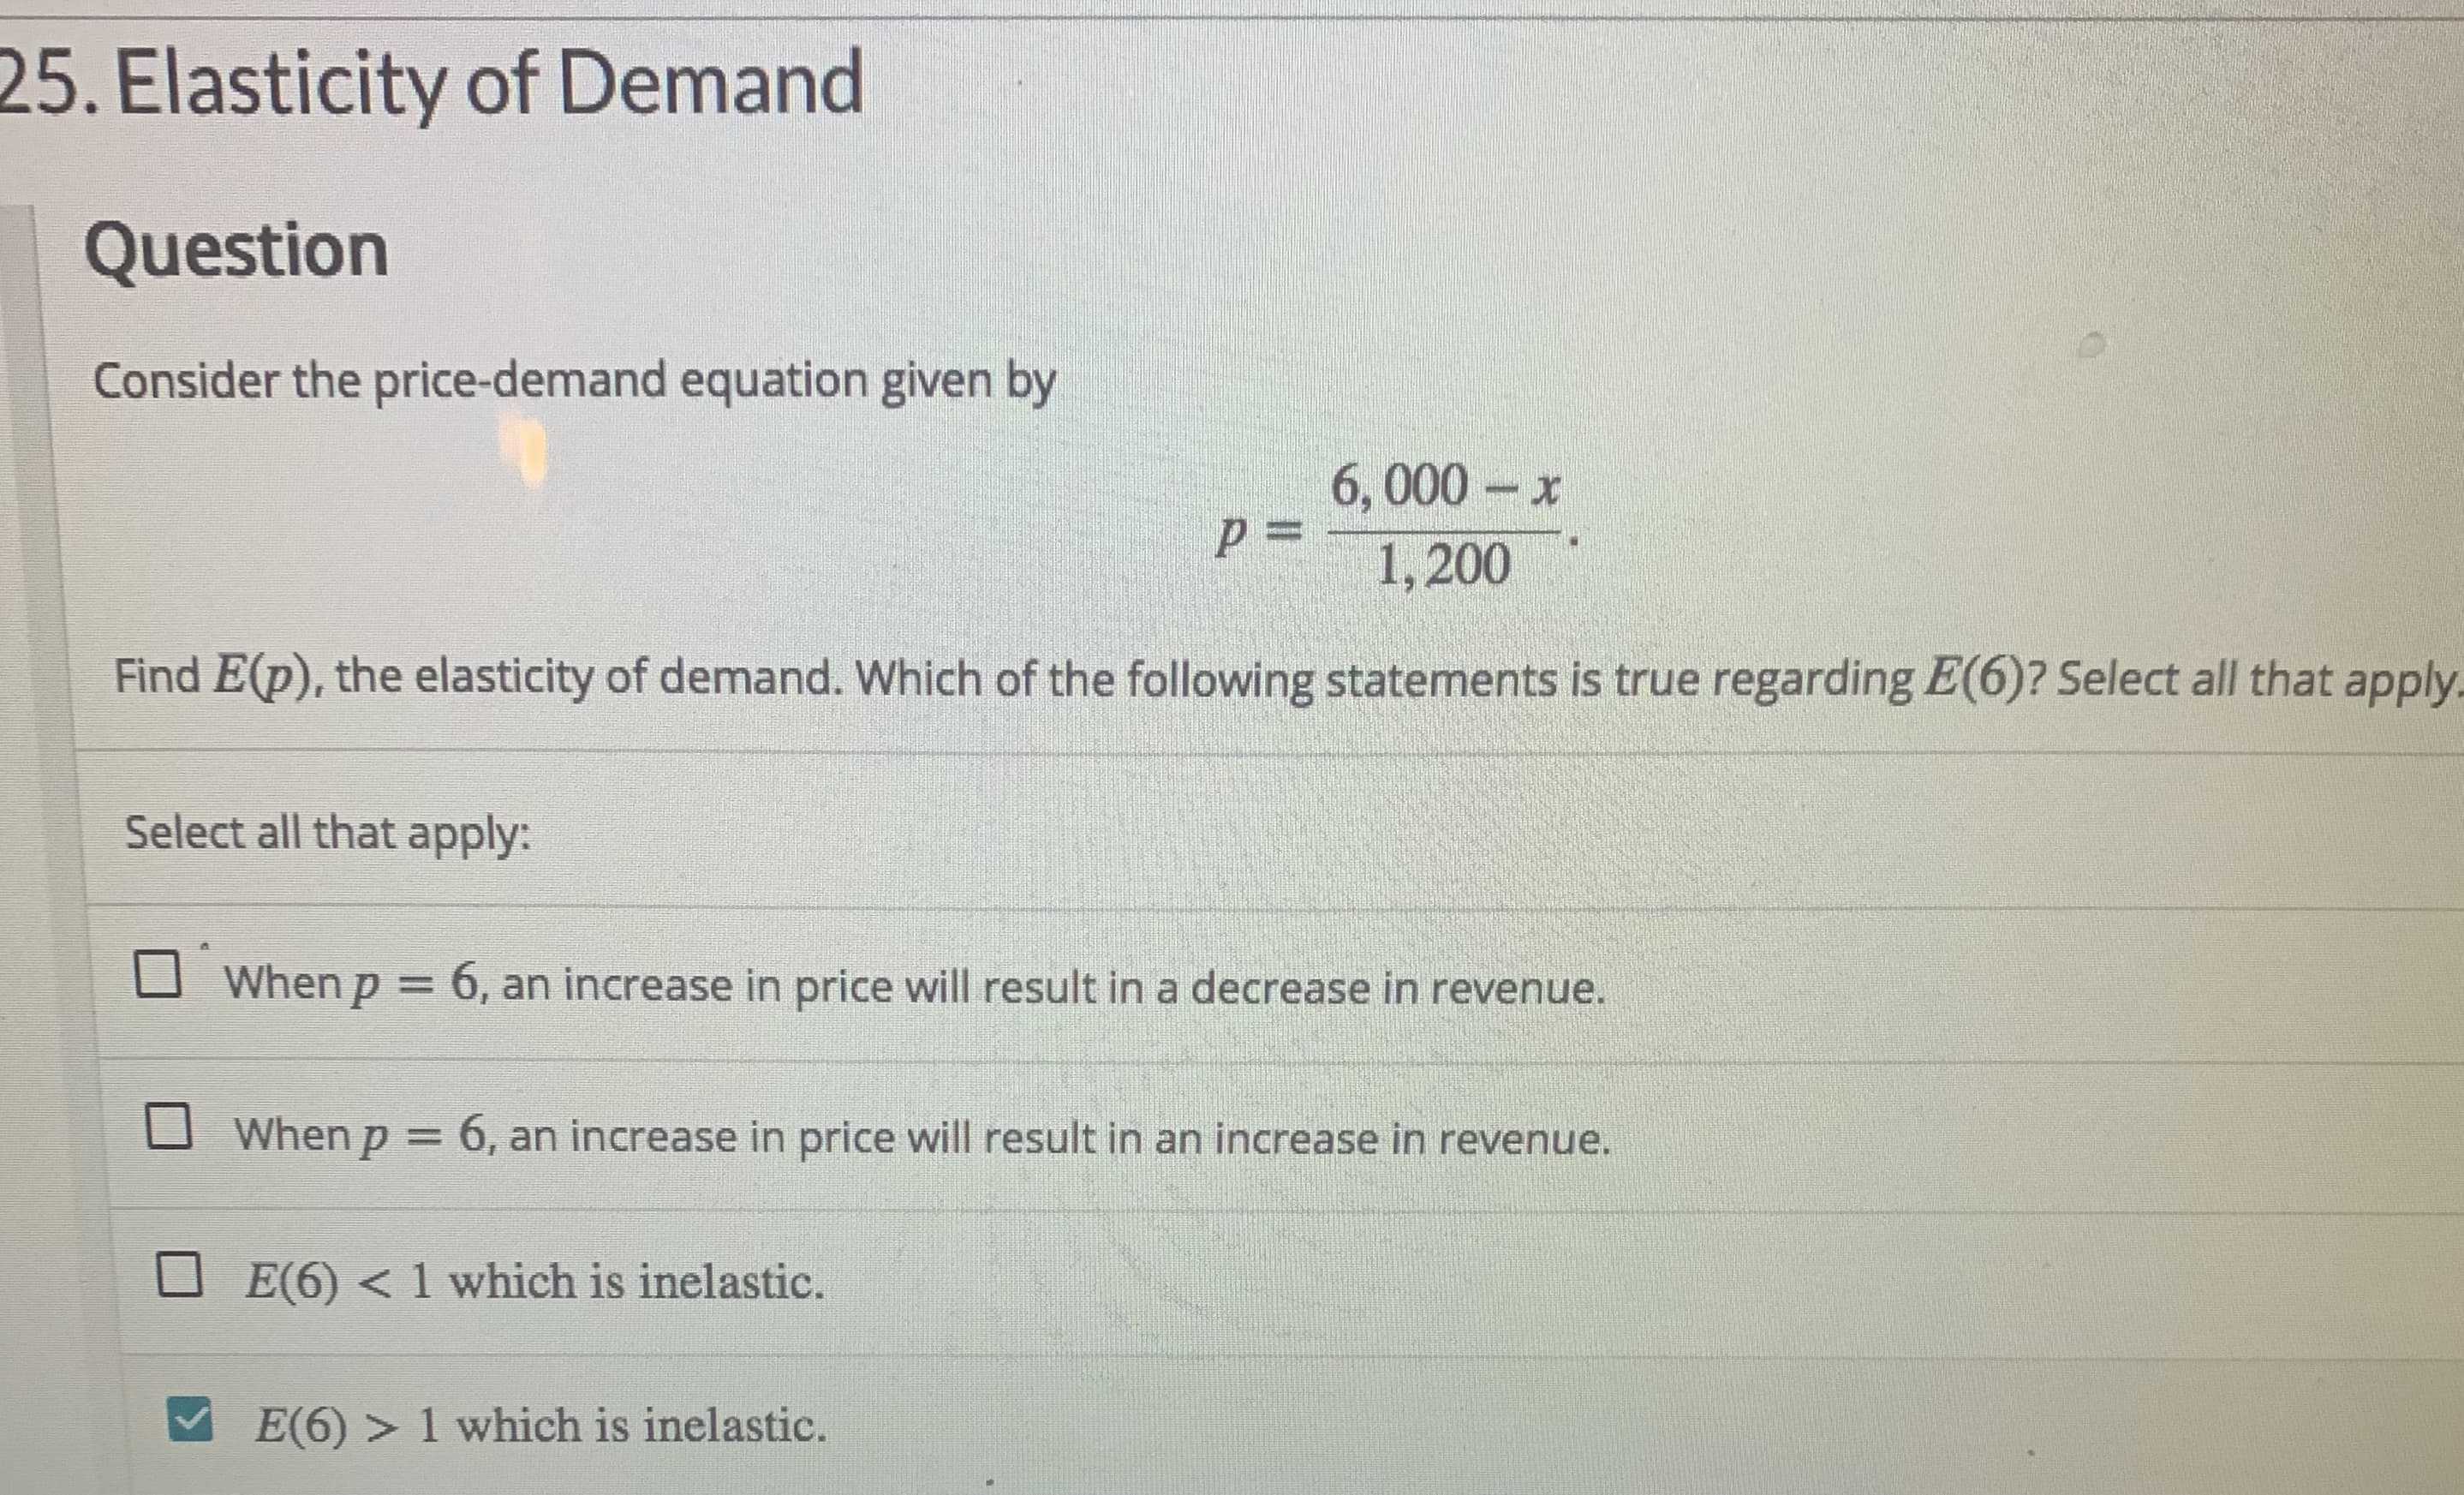 25. Elasticity of Demand
Question
Consider the price-demand equation given by
6,000-x
p%3D
1,200
Find E(p), the elasticity of demand. Which of the following statements is true regarding E(6)? Select all that apply.
Select all that apply:
When p = 6, an increase in price will result in a decrease in revenue.
%3D
When p = 6, an increase in price will result in an increase in revenue.
E(6) < 1 which is inelastic.
E(6) > 1 which is inelastic.
